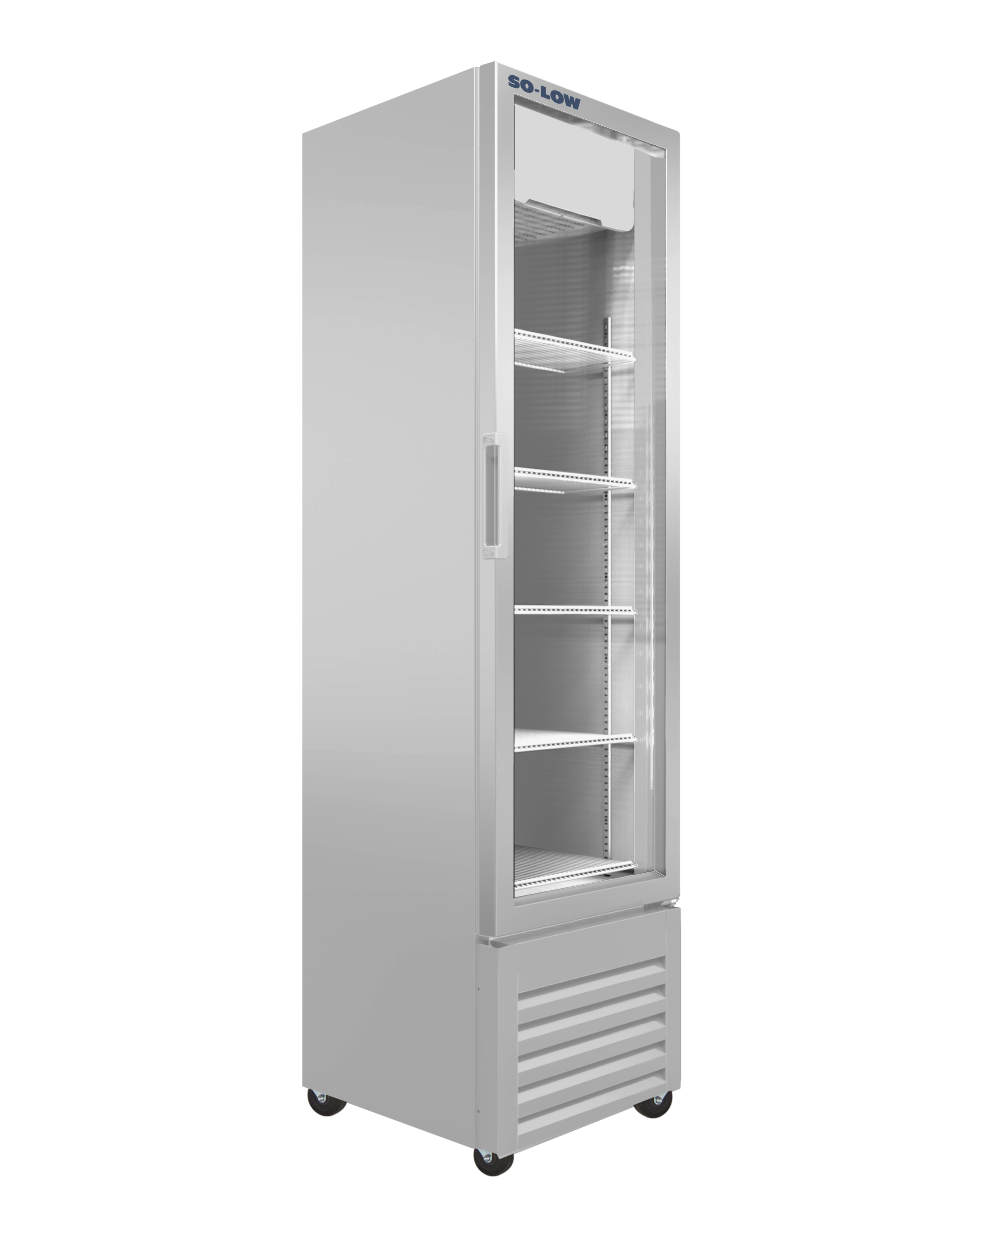 So-Low 2ºC to 8ºC, 8 cu.ft., single glass door, Cycle Defrost, 115v